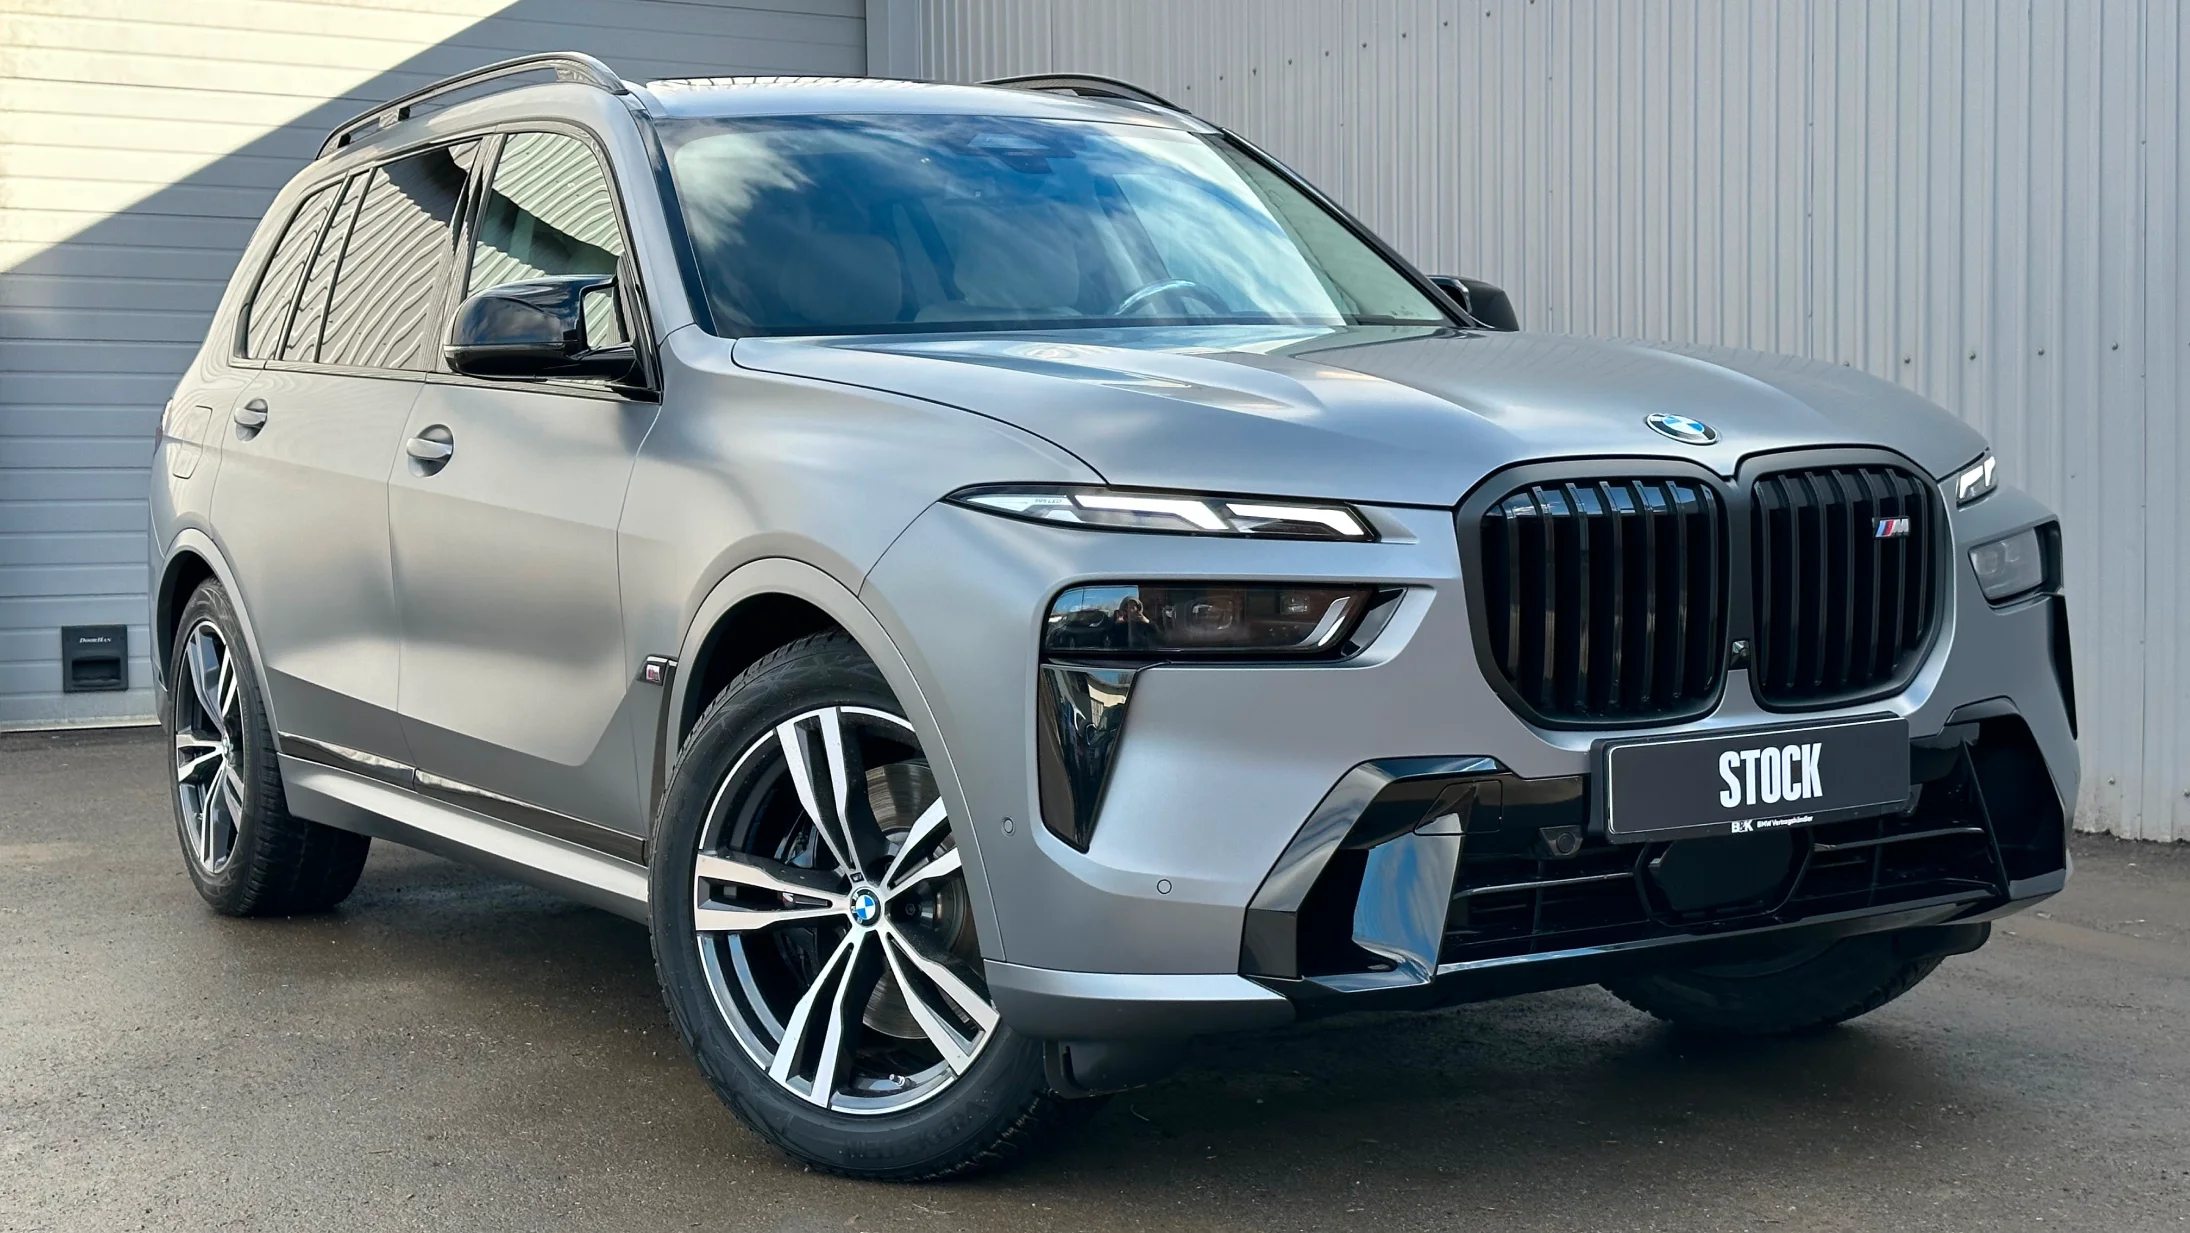 Front angle view on a BMW X7 with a body kit giving the car a custom appearance